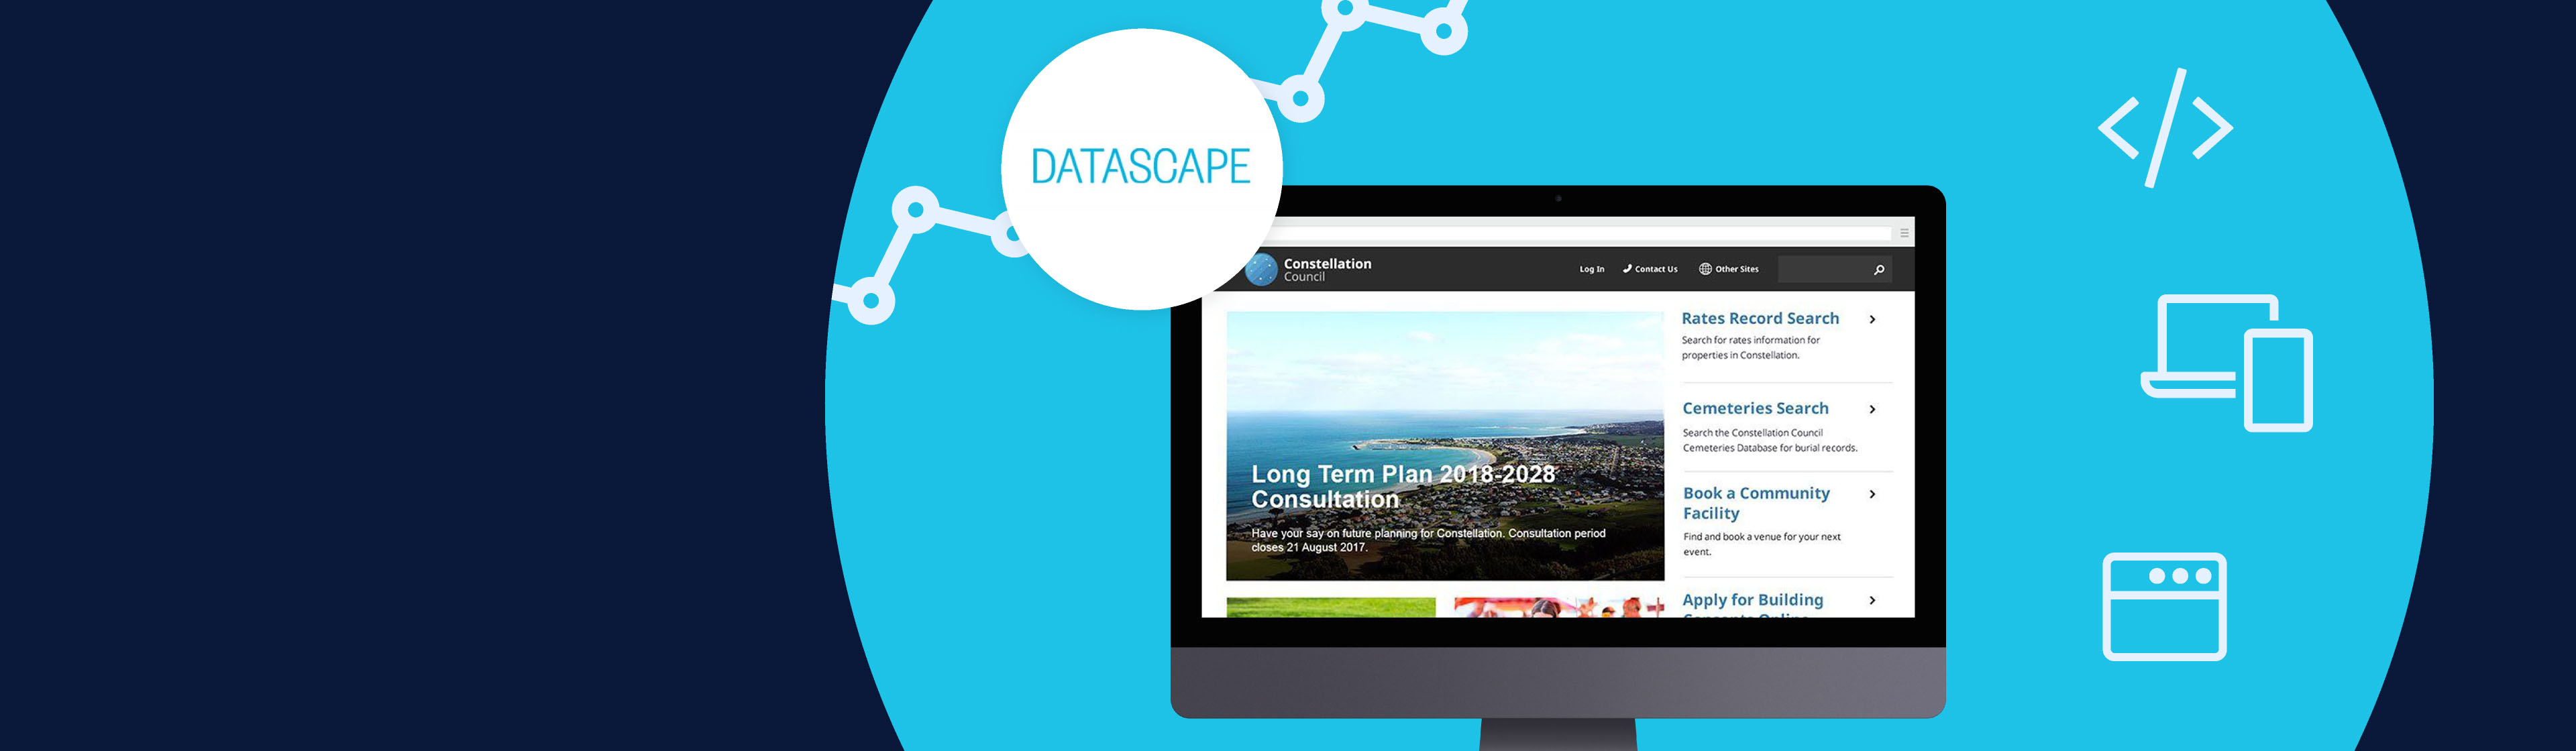 Screen mockup of a website create using the Datascape Websites software